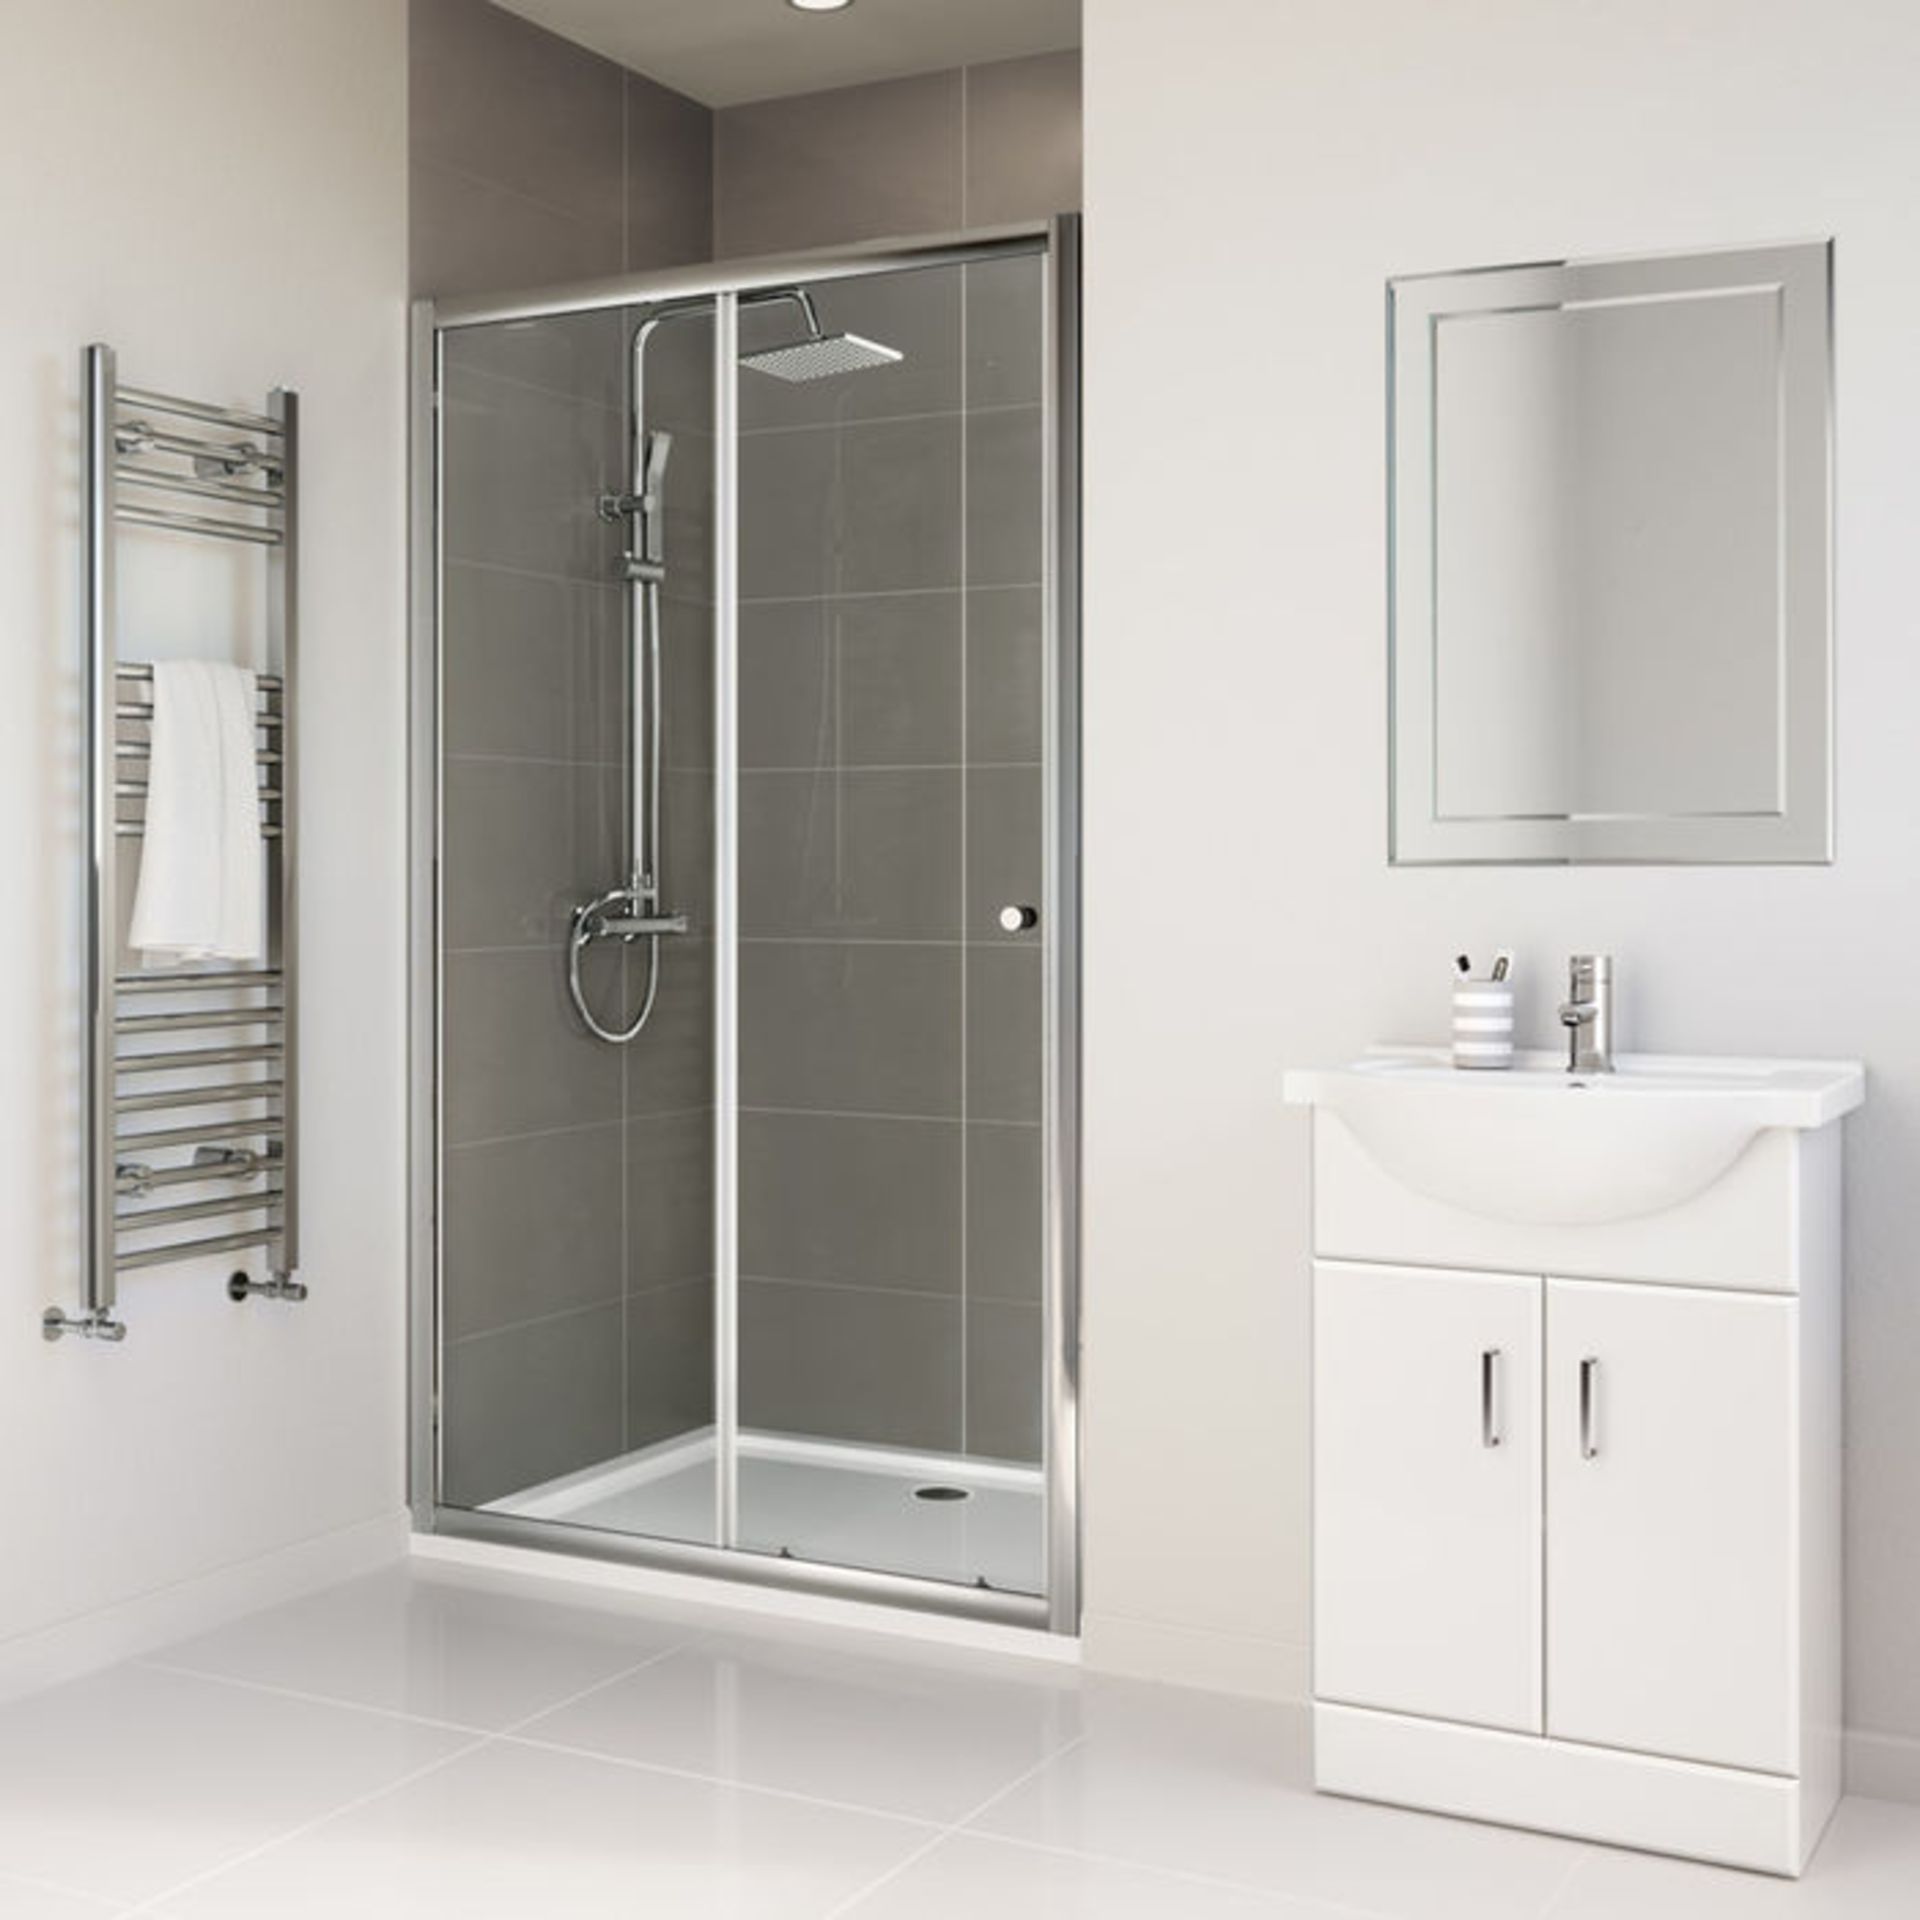 (CS197) 1000mm - Elements Sliding Shower Door. RRP £249.99. 4mm Safety Glass Fully waterproof tested - Image 4 of 5